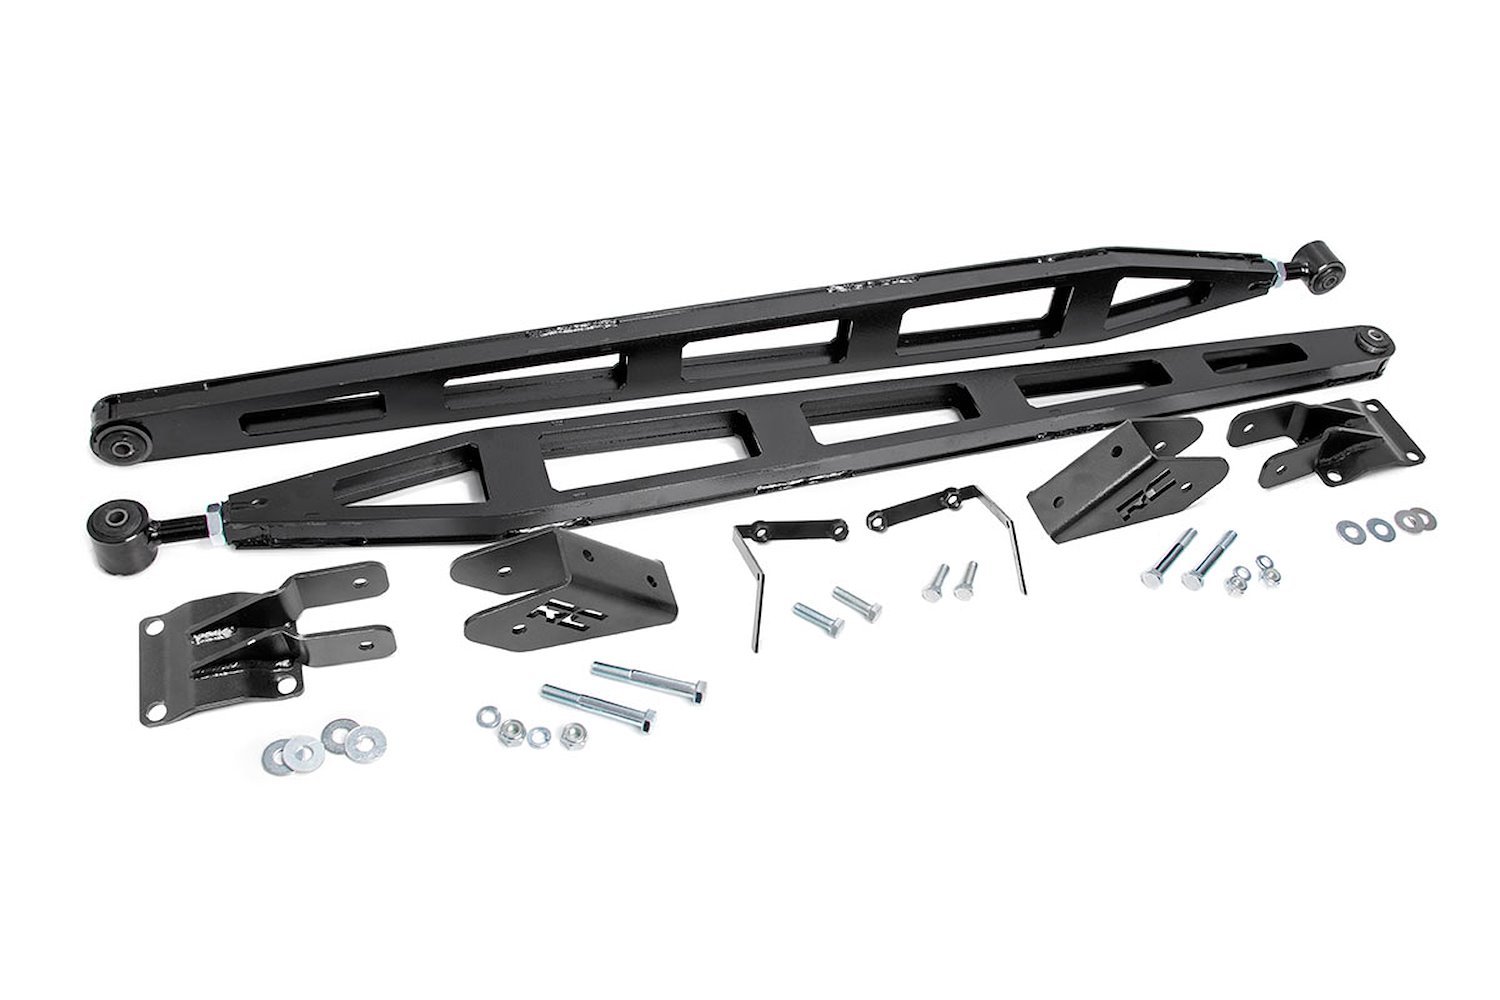 11001 Traction Bar Kit for 0-7.5-inch Lifts